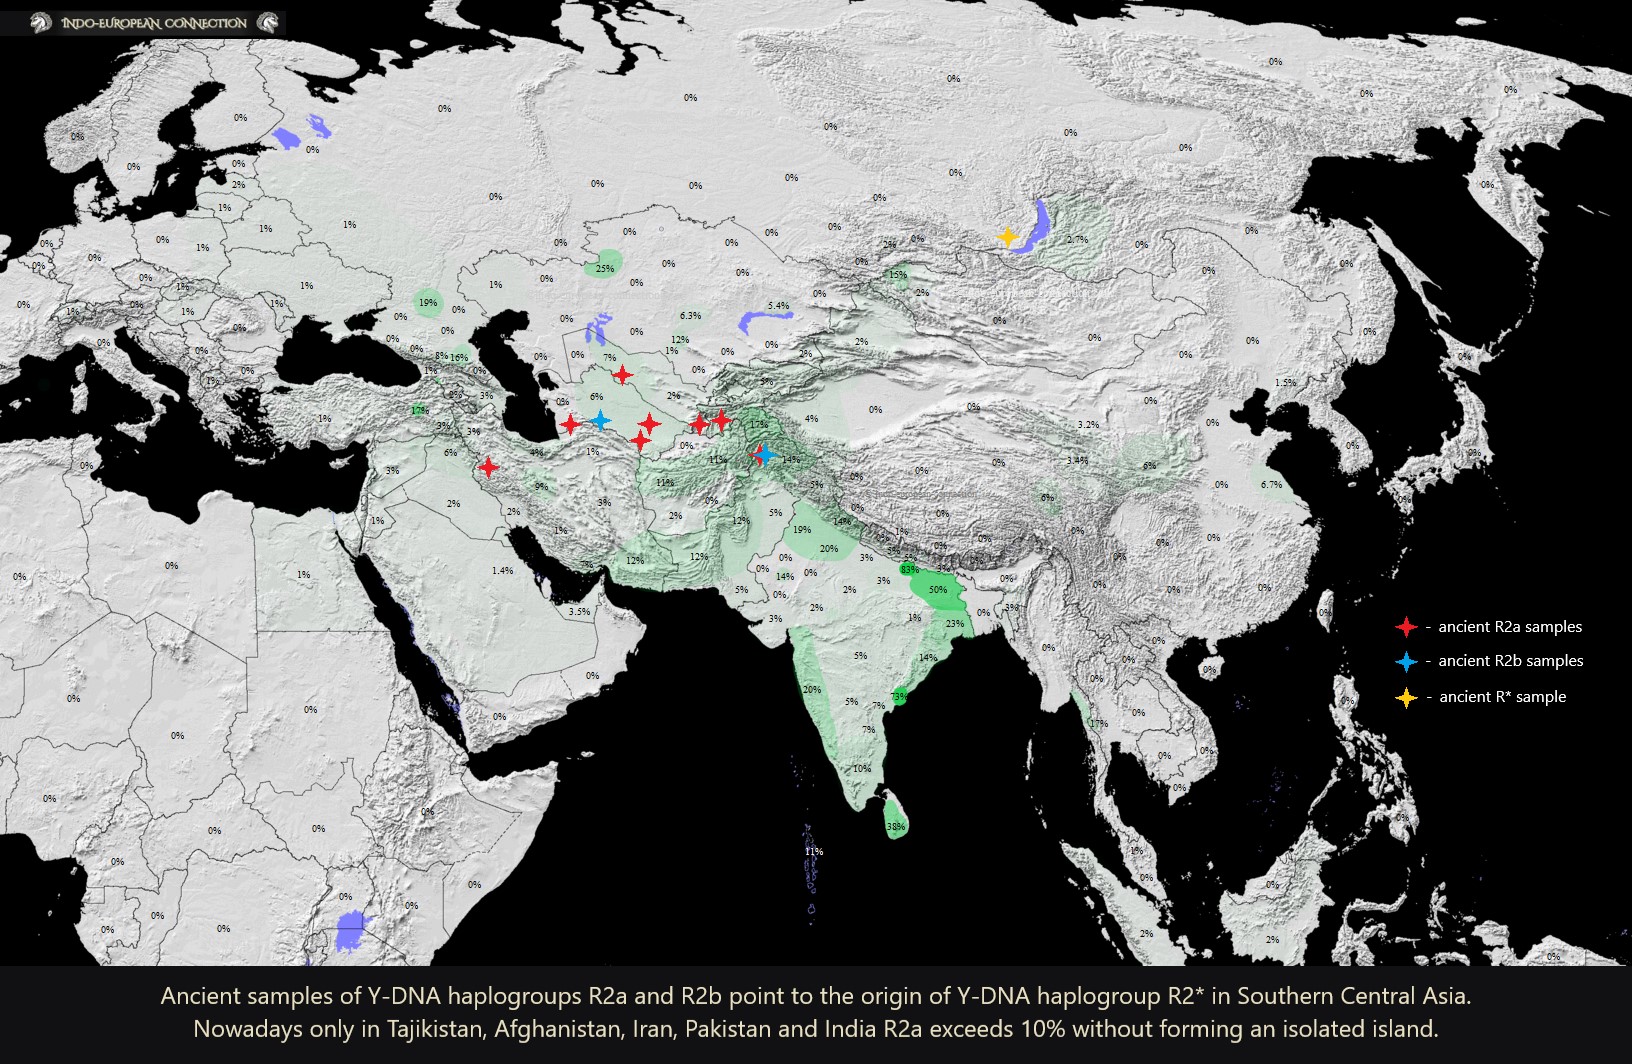 heatmap with visible percentages of Y-DNA haplogroups R2a and R2b in Africa and Eurasia combined with a marked appearance of their ancient samples ©indo-european-connection